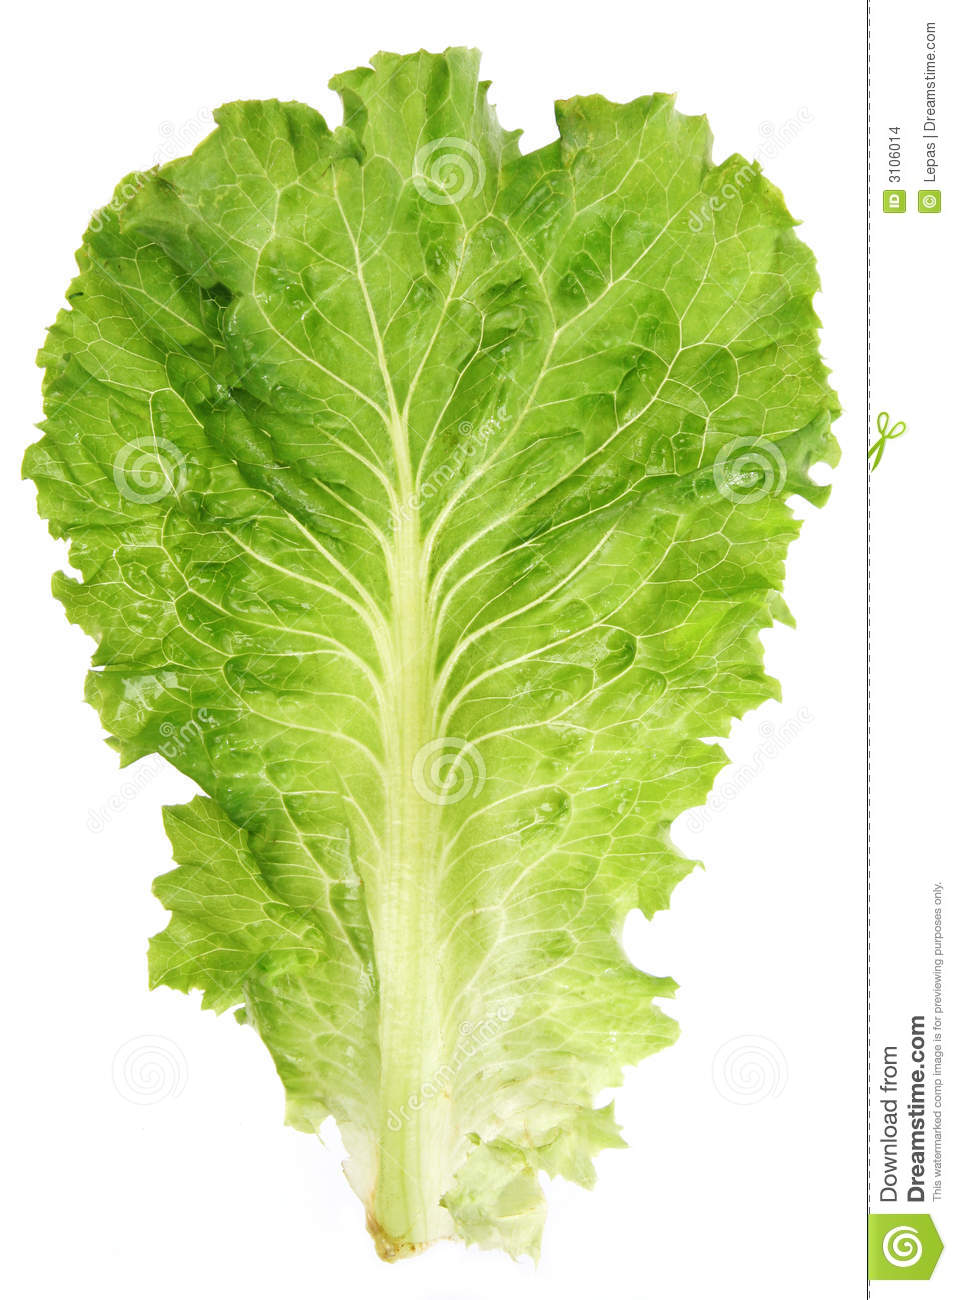 Lettuce Leaf Closeup View Isolated On White Background